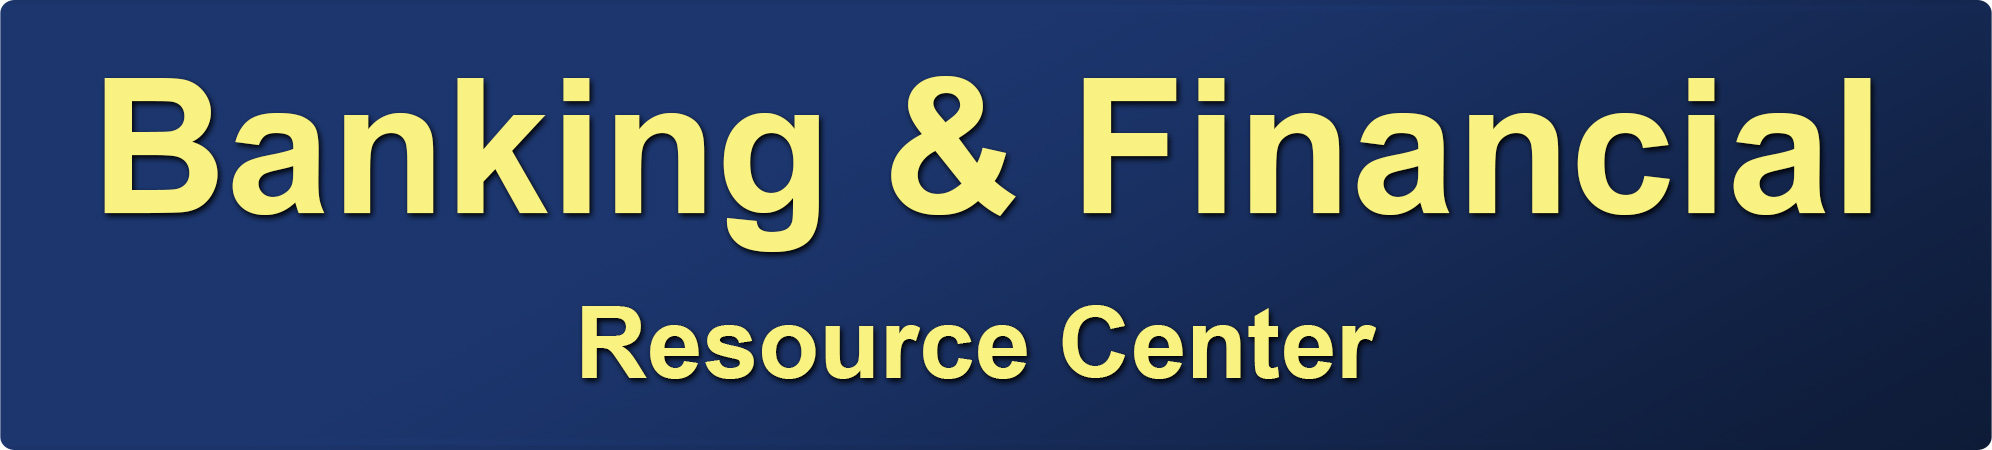 Banking and Financial Resource Center